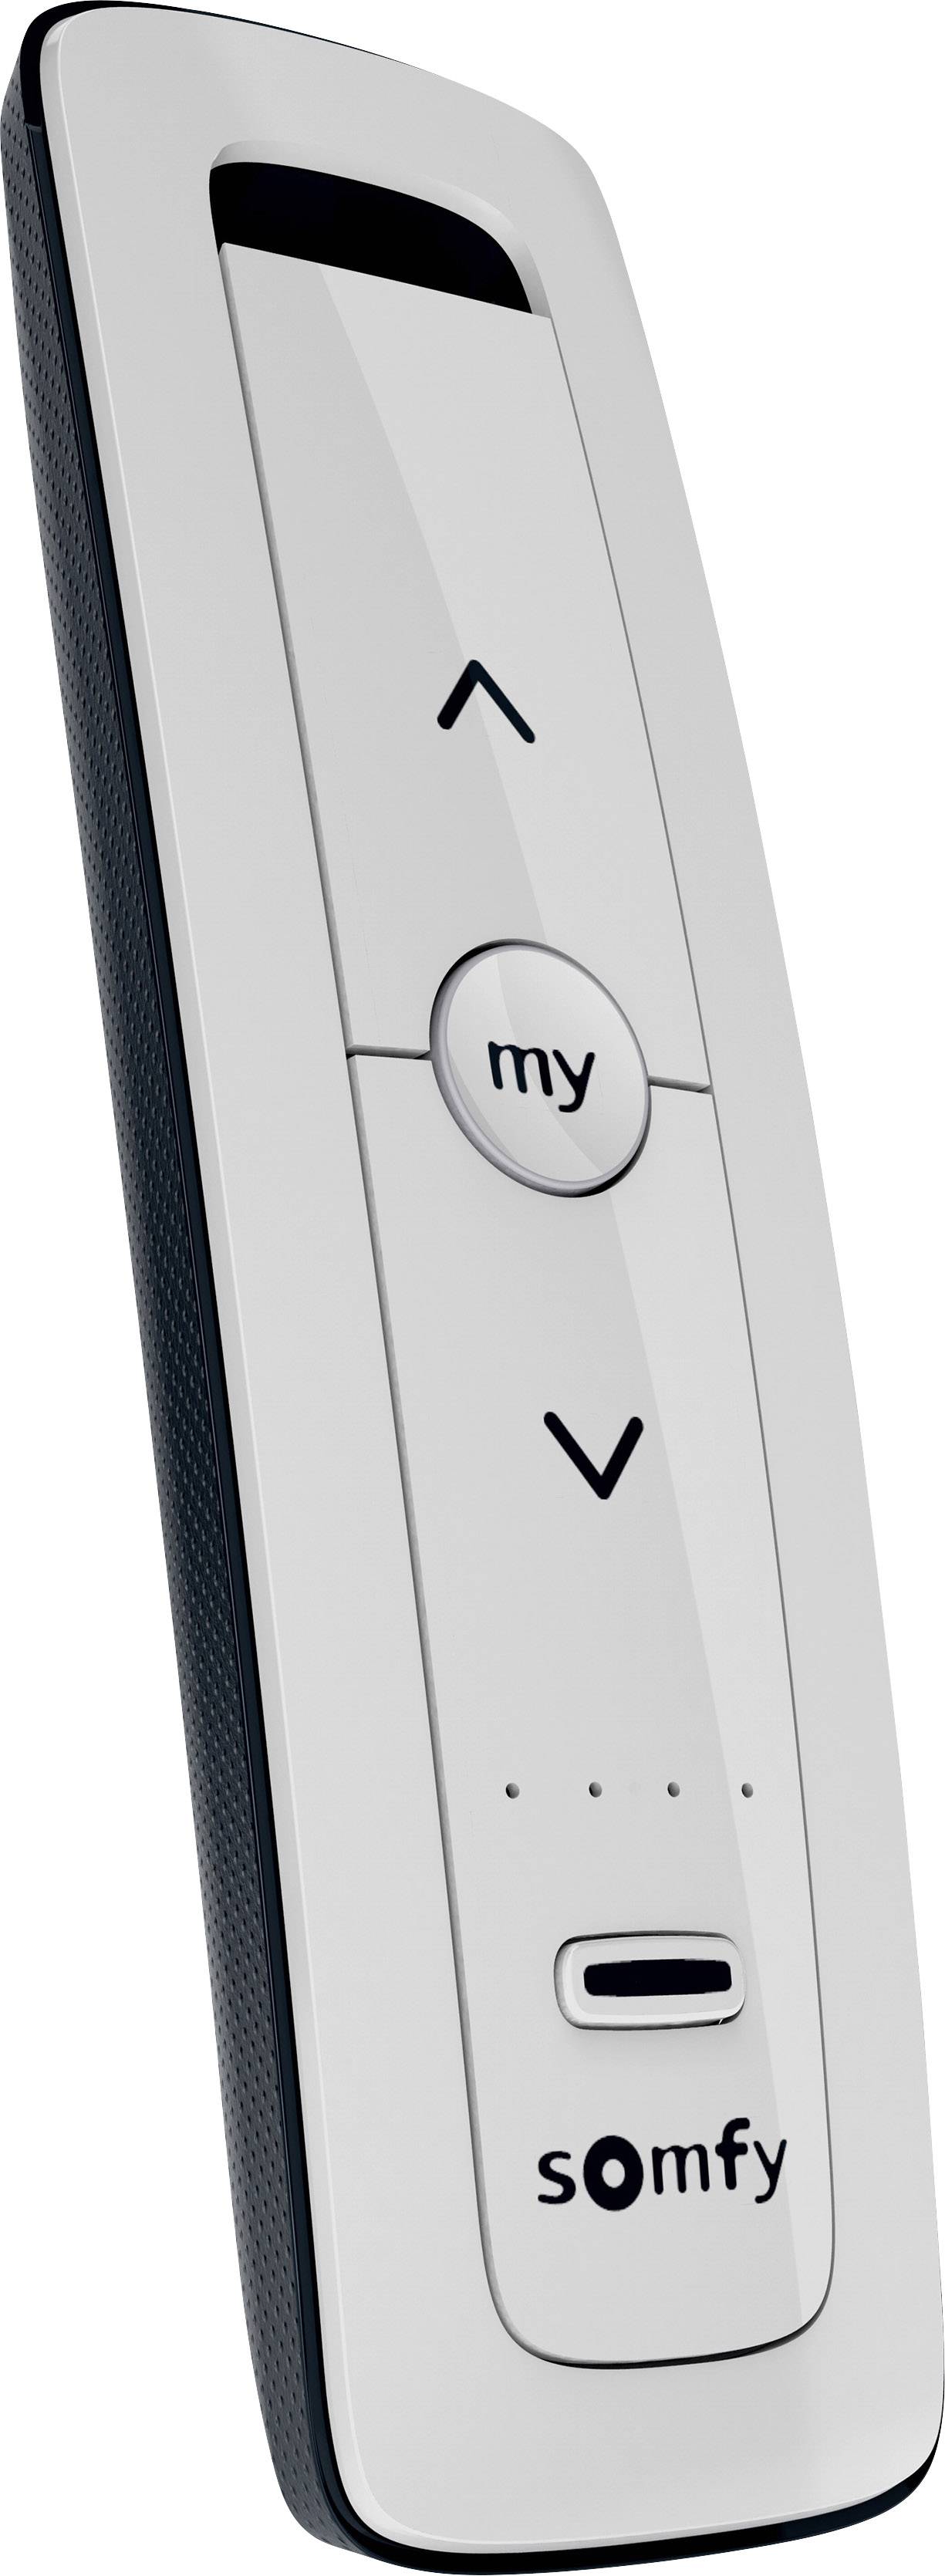 Somfy Remote Control Somfy Telecommande for Automatic Gate and Garage Door  - China Somfy Remote Control, Somfy Telecommande